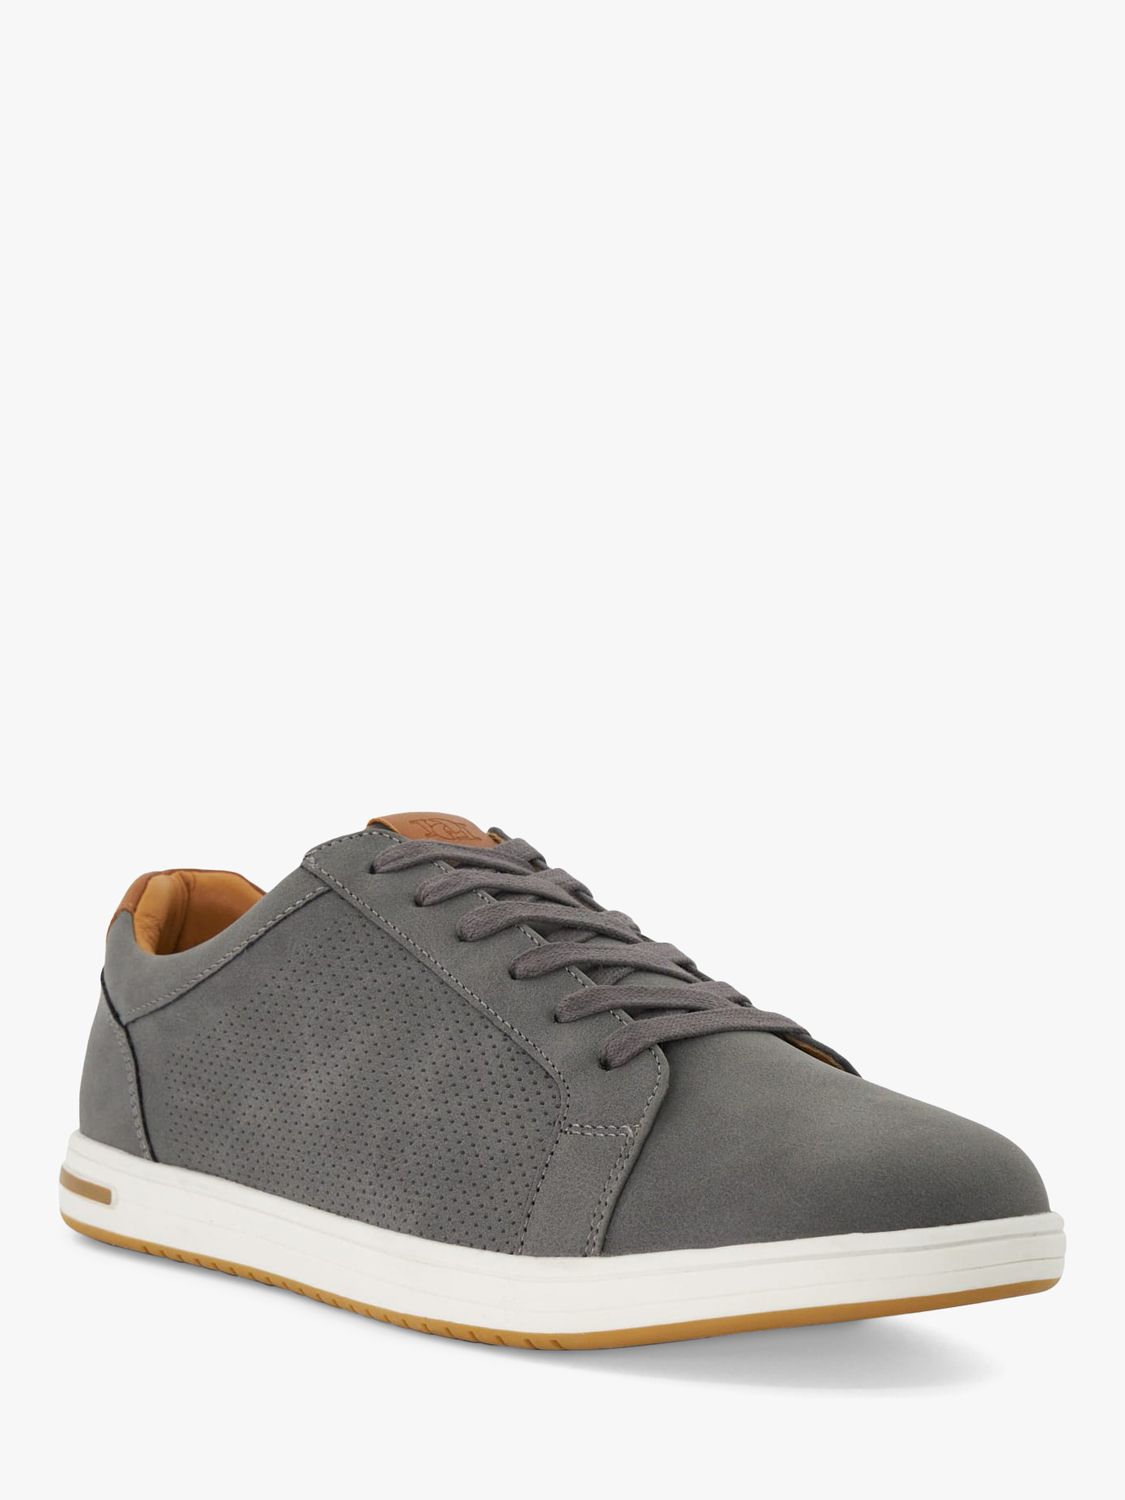 Buy Dune Wide Fit Tezzy Suedette Lace Up Trainers, Grey Online at johnlewis.com